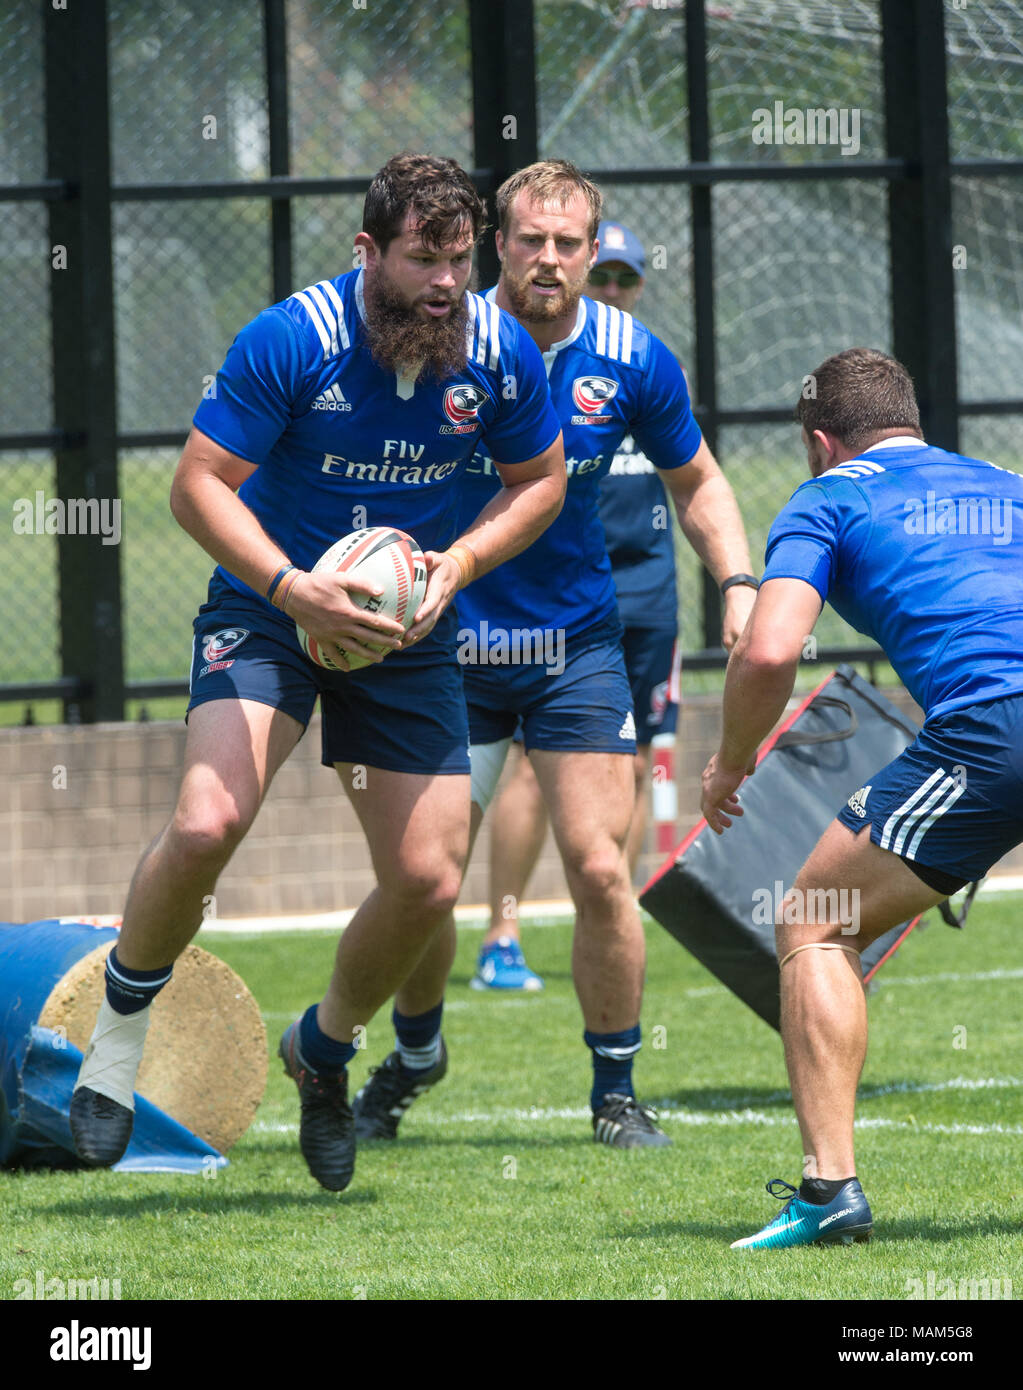 HONG KONG,HONG KONG SAR,CHINA:April 3rd 2018. The USA Rugby team conduct a training session at So Kon Po recreation ground ahead of their Hong Kong Rugby 7's matches. Danny Barrett runs with the ball.Alamy Live News Stock Photo